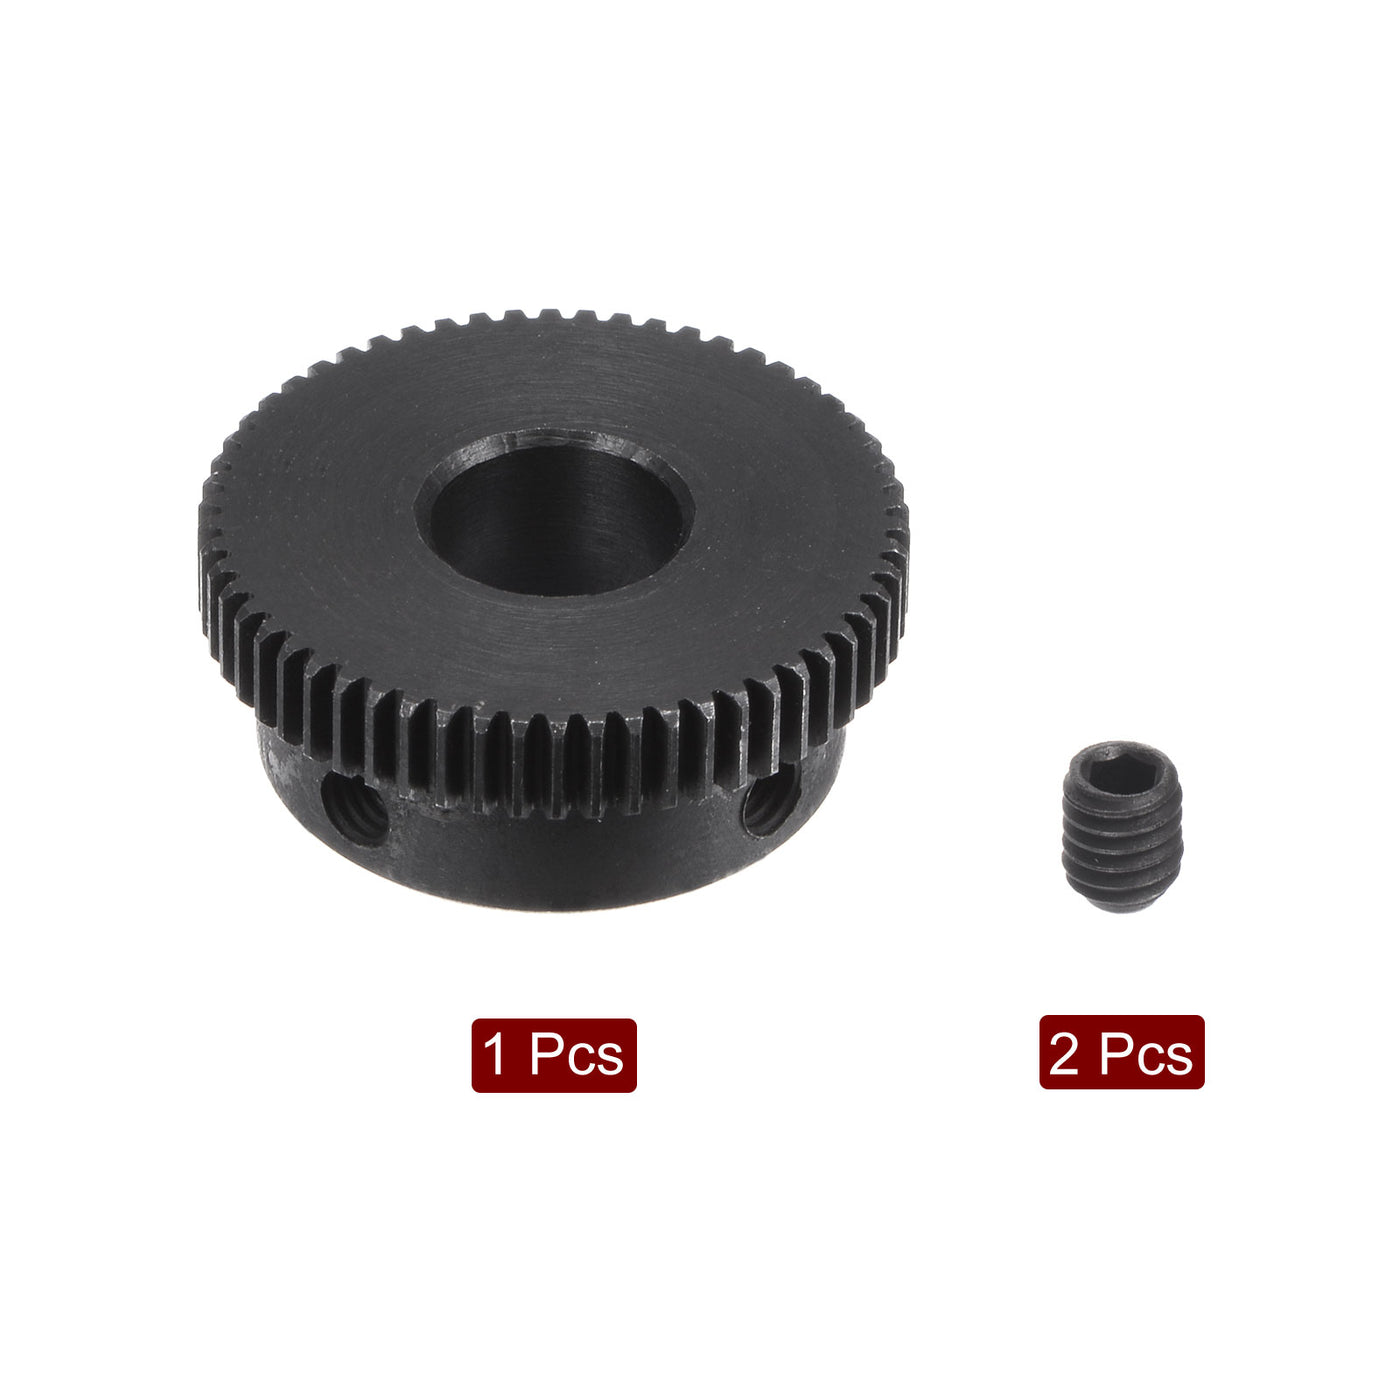 uxcell Uxcell 0.5 Mod 58T 10mm Bore 30mm Outer Dia 45# Carbon Steel Motor Pinion Gear Set